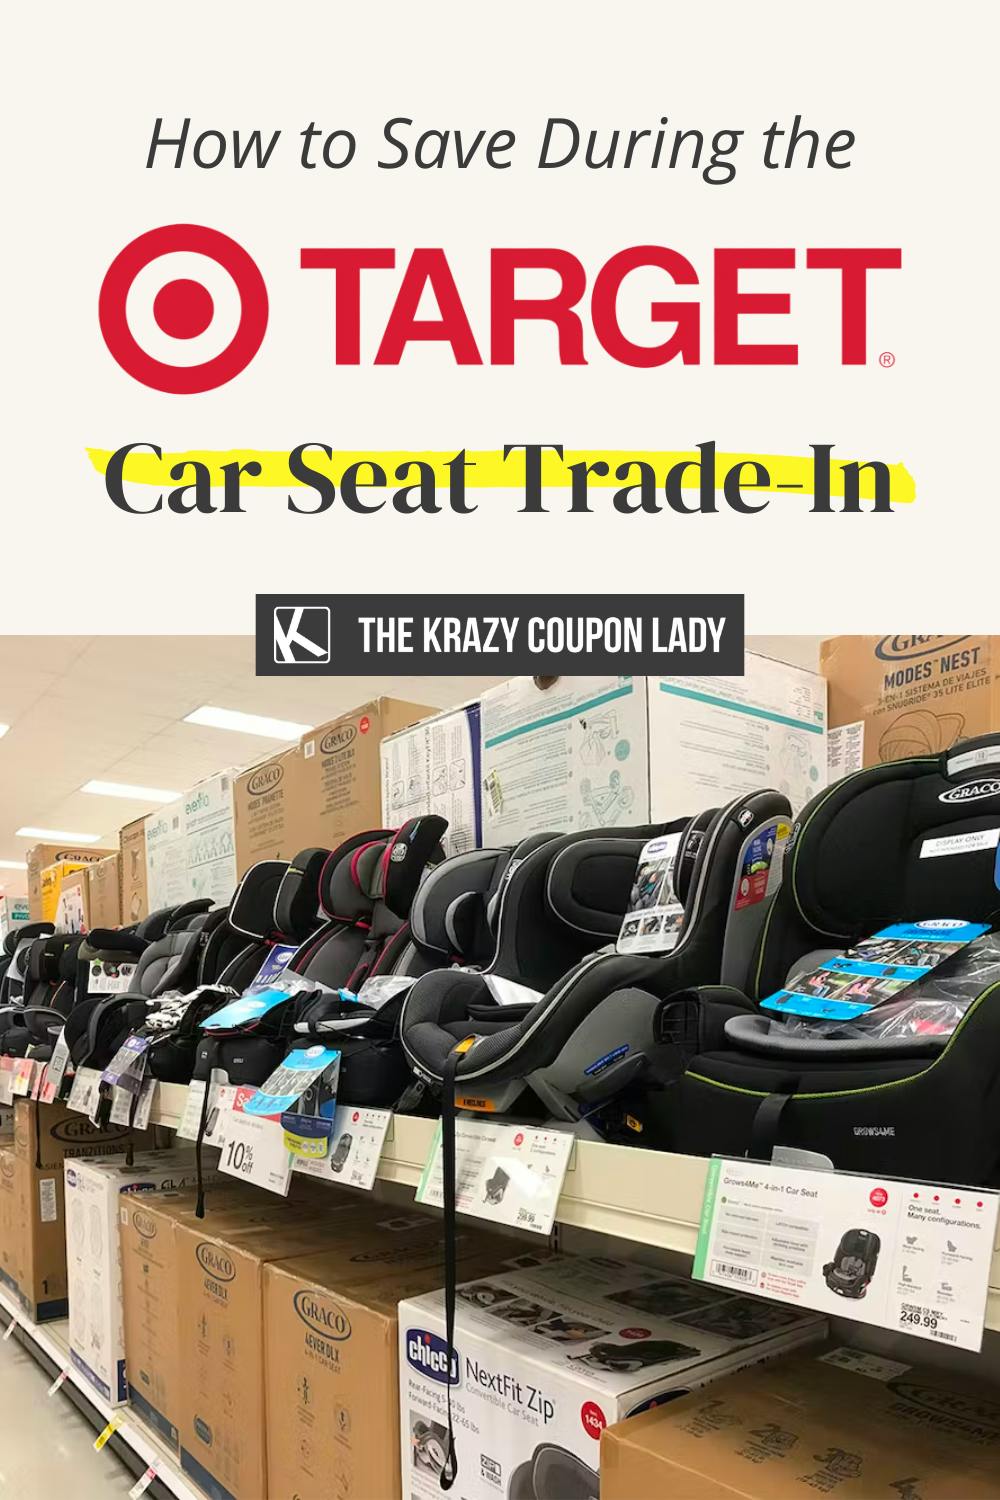 Target Car Seat Trade-In Confirmed for April 16 - 29 — Here's What Coupon You'll Get